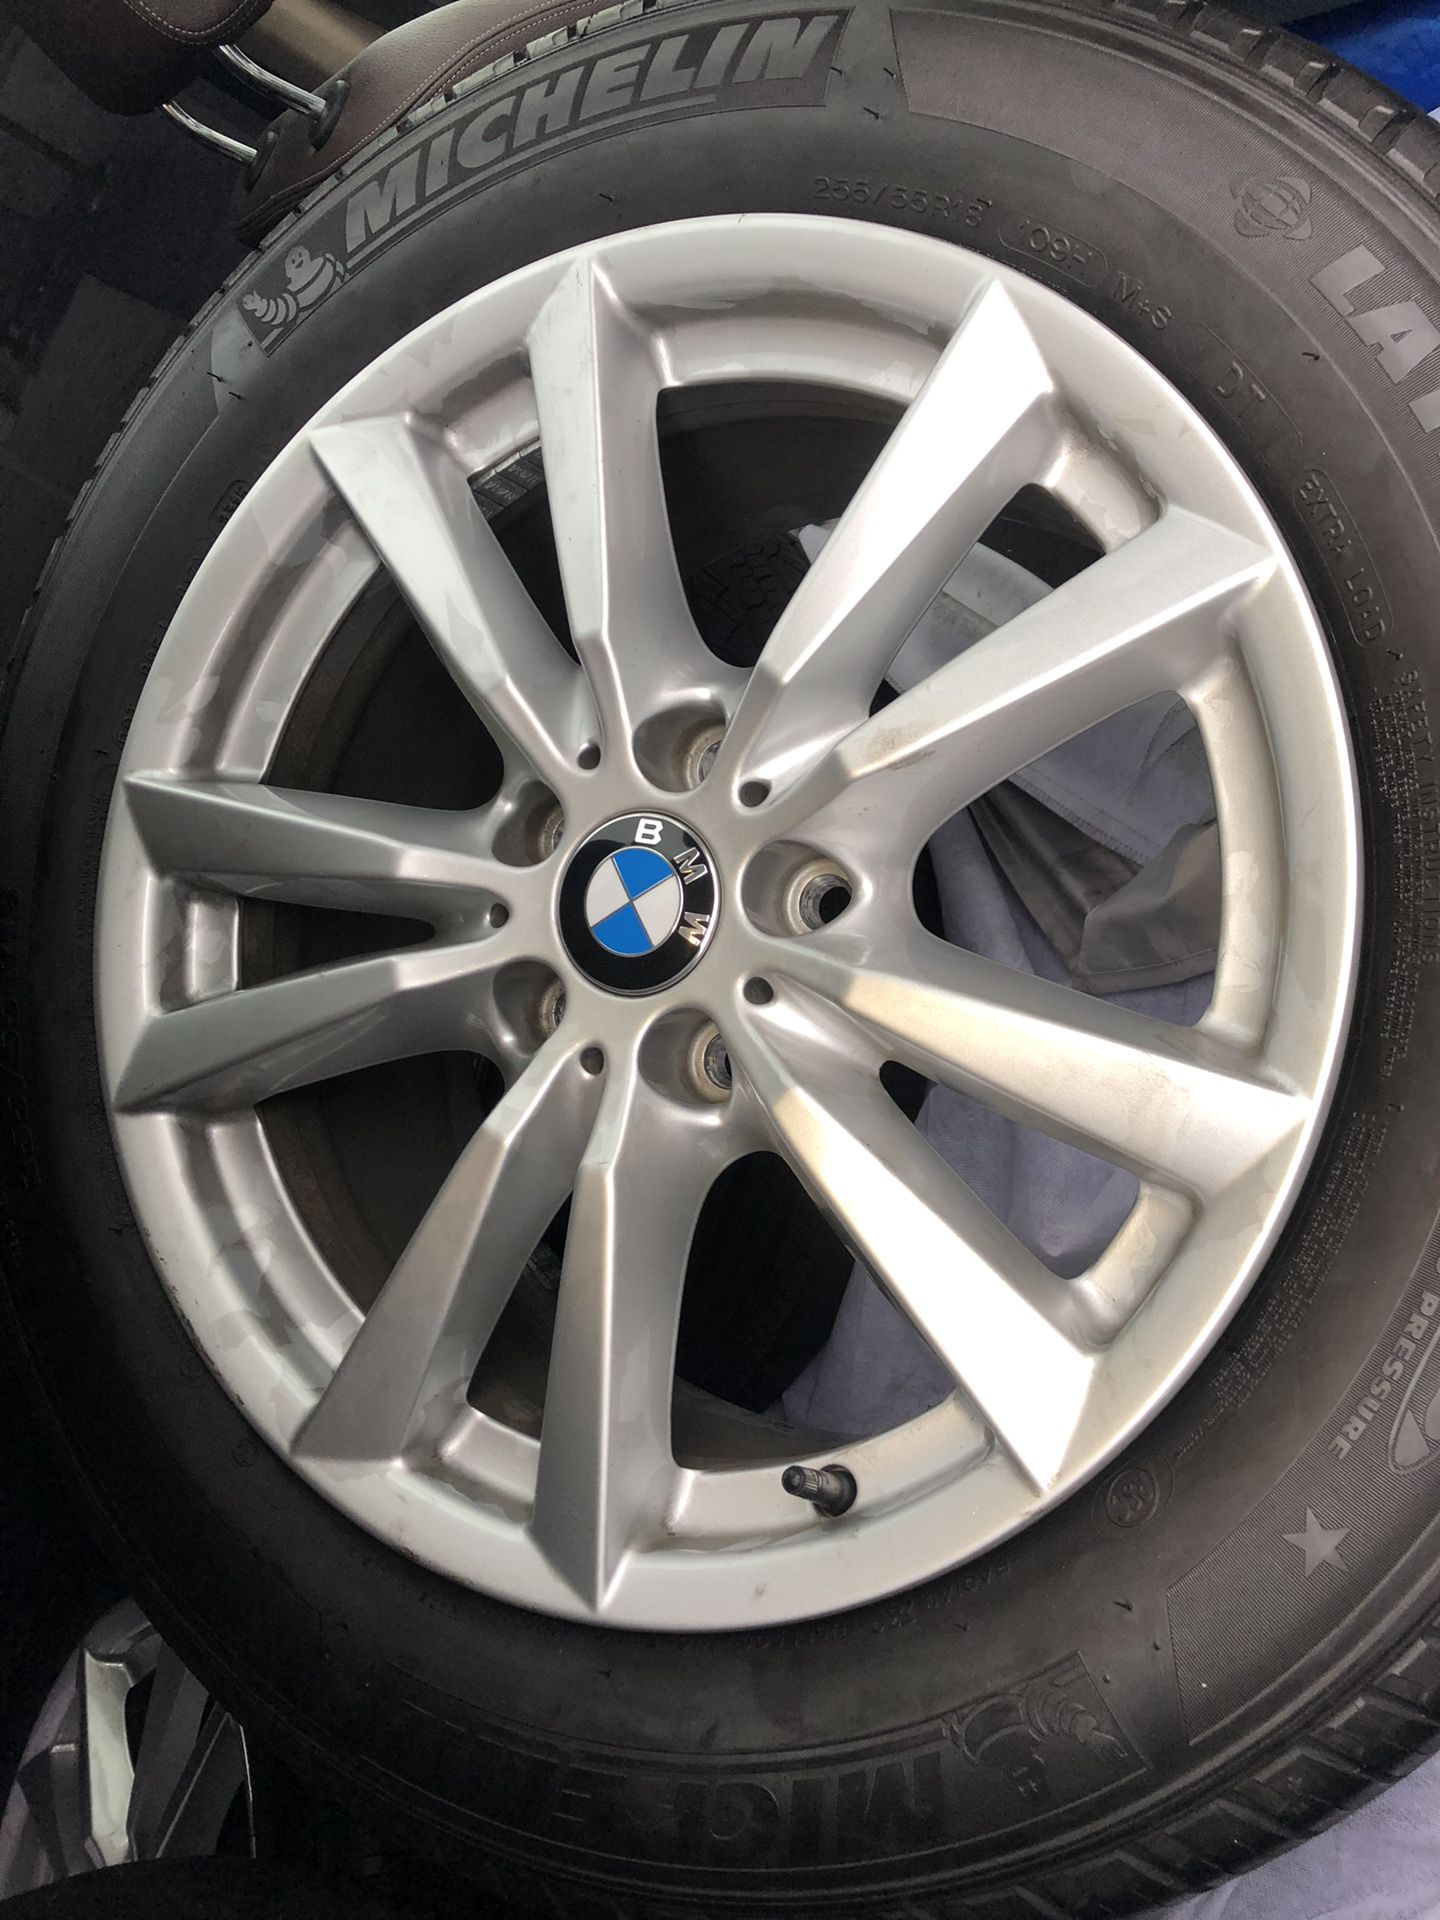 4 Brand new MICHELIN TIRES 255/55/R18 with BMW wheels X5 for $180 each